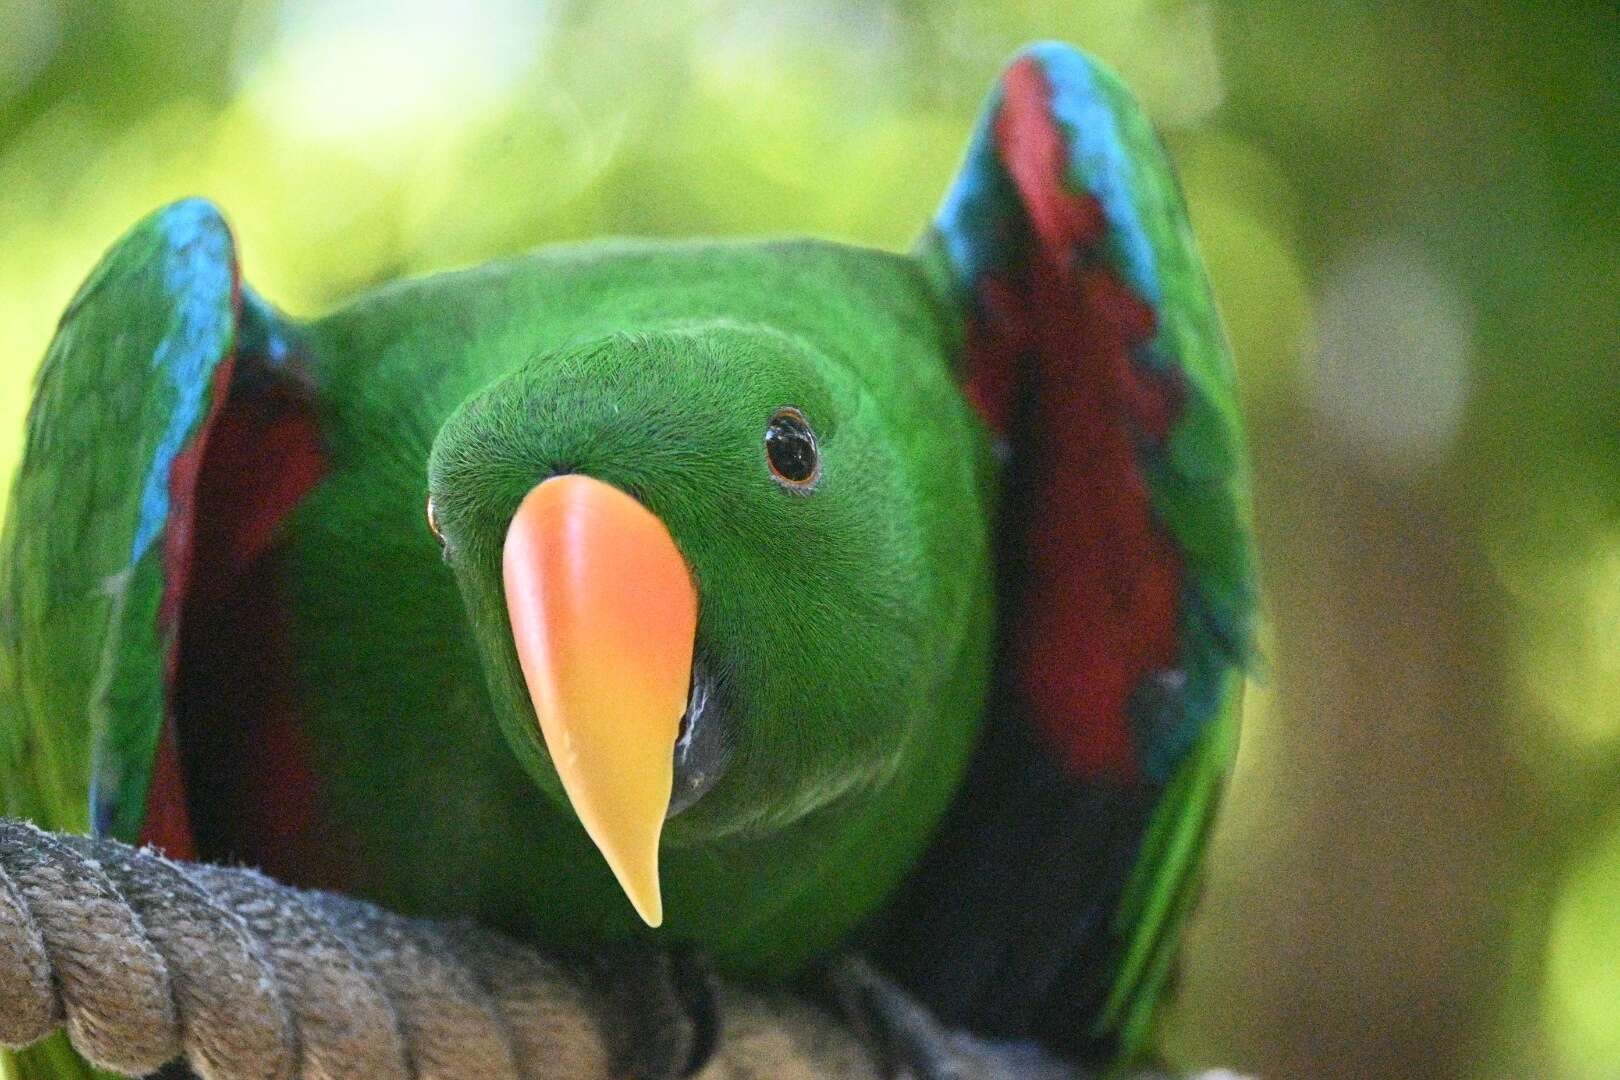 Image of Eclectus Wagler 1832